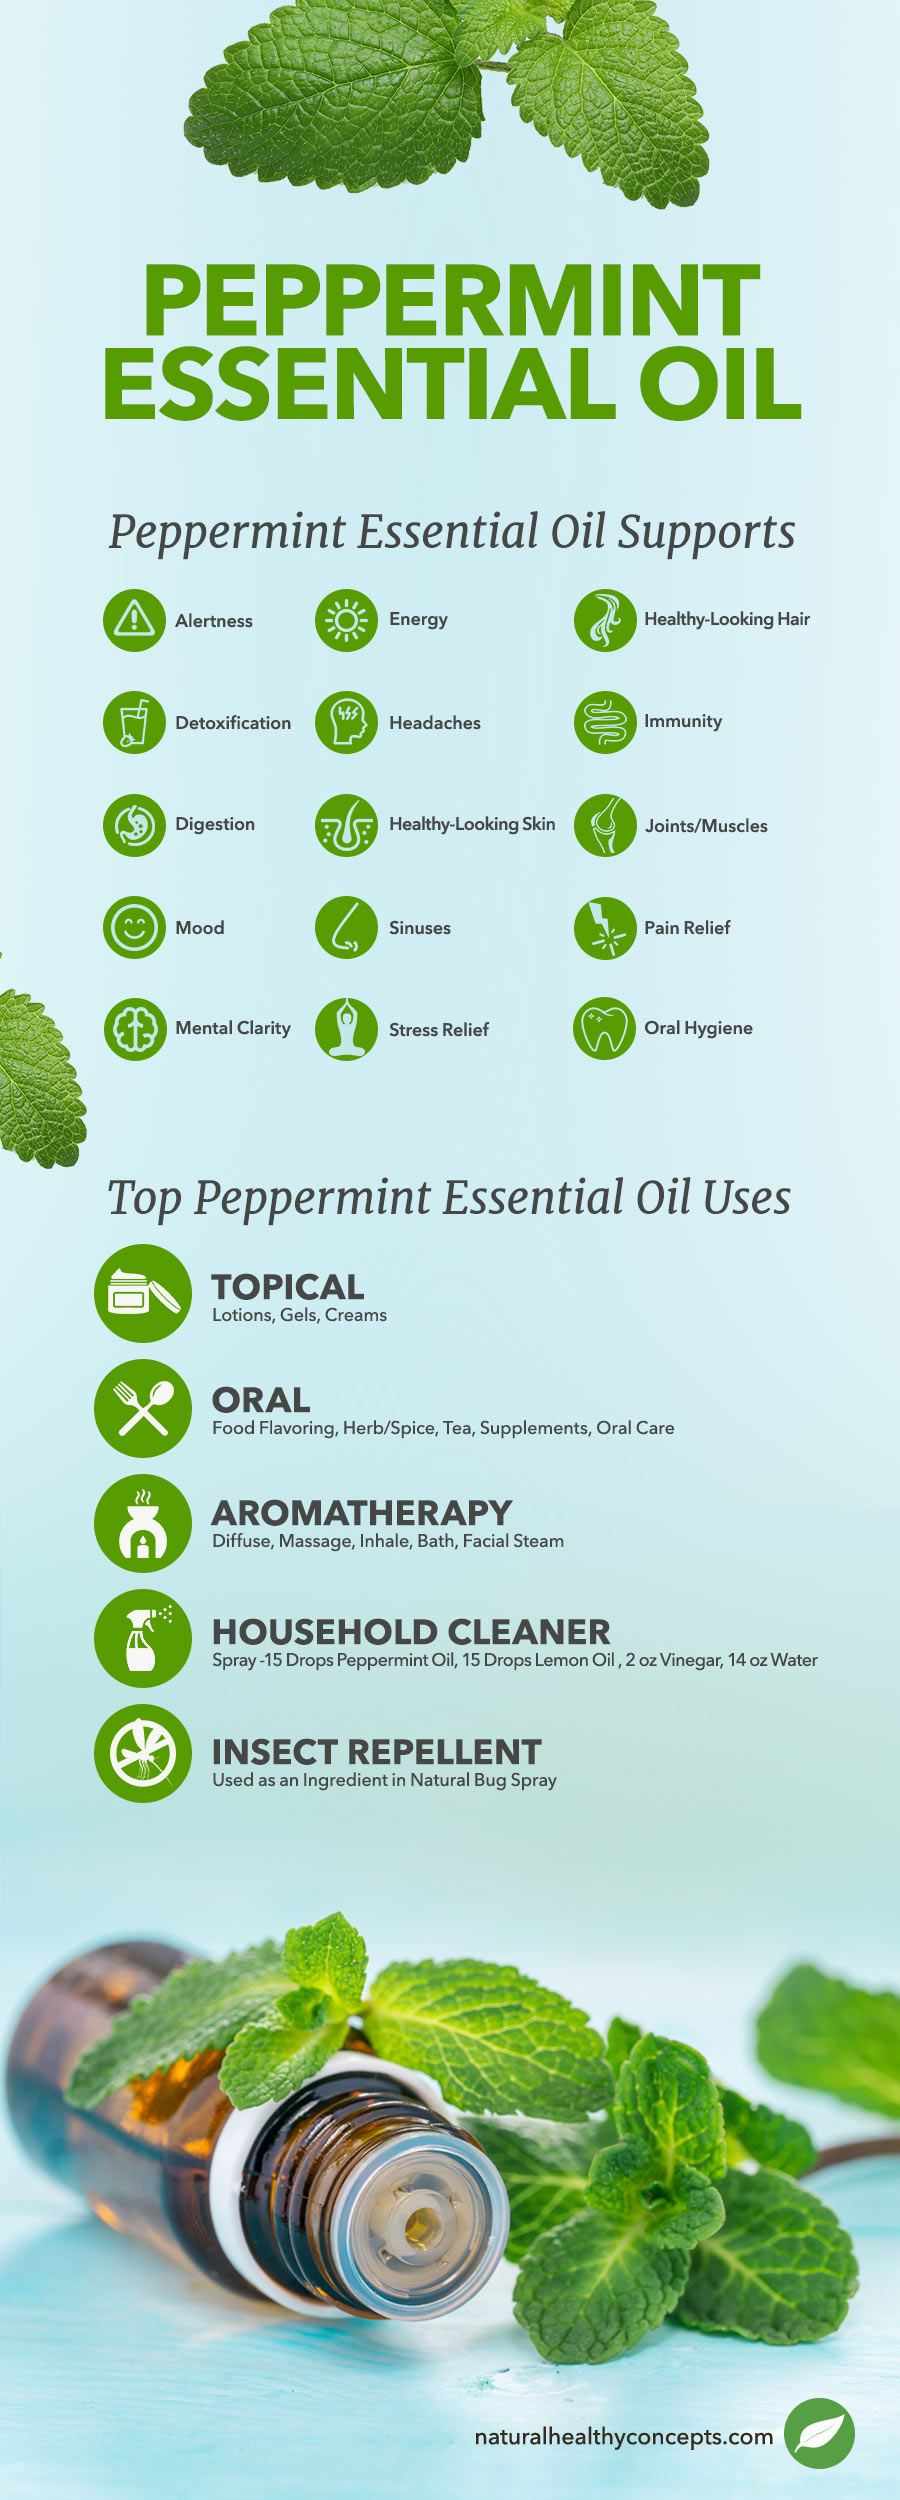 peppermint essential oil infographic